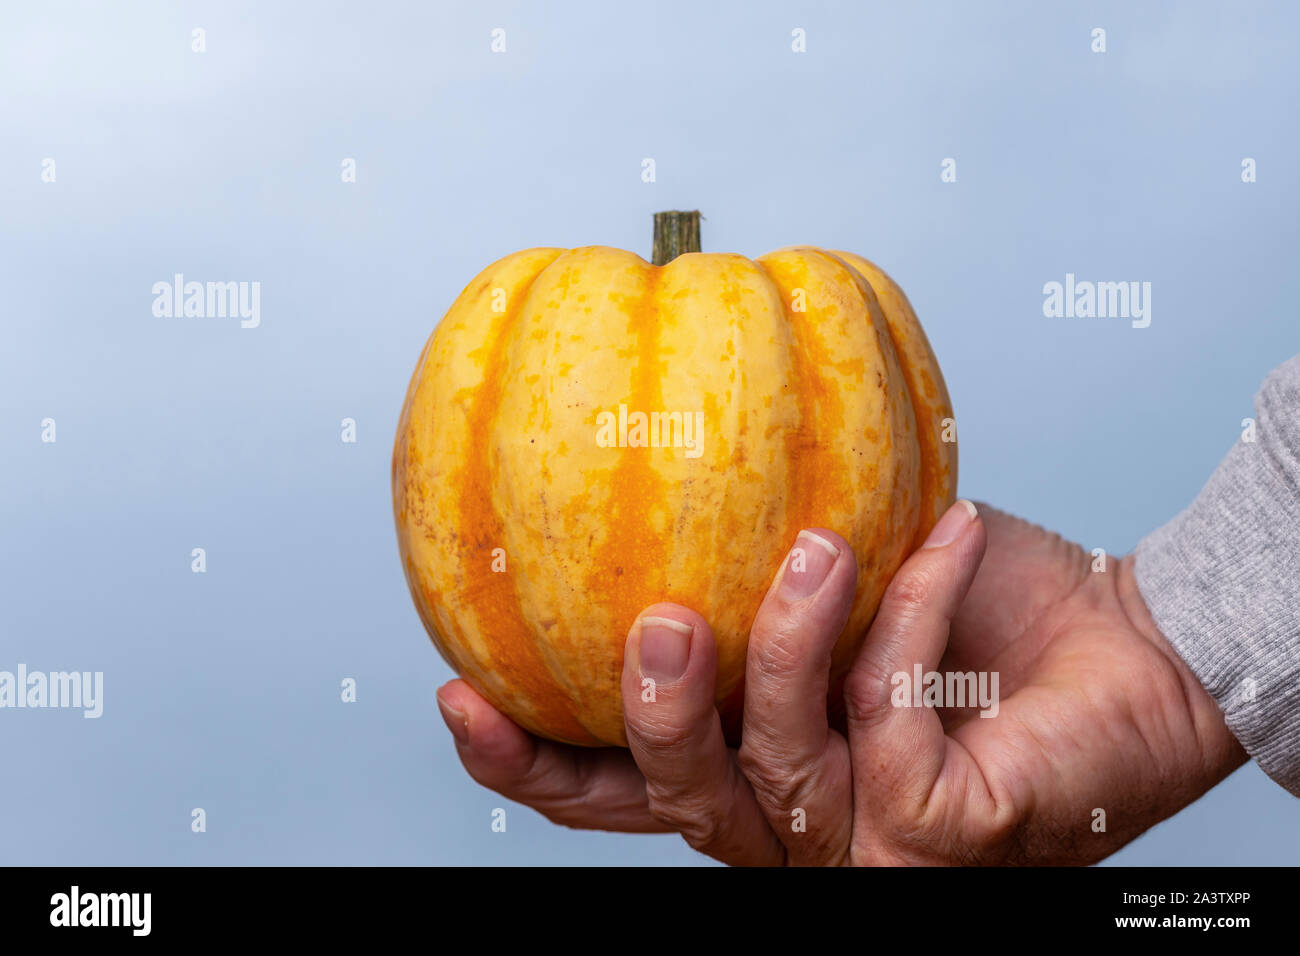 Hand holding a small pumpkin, squash vegetable Stock Photo